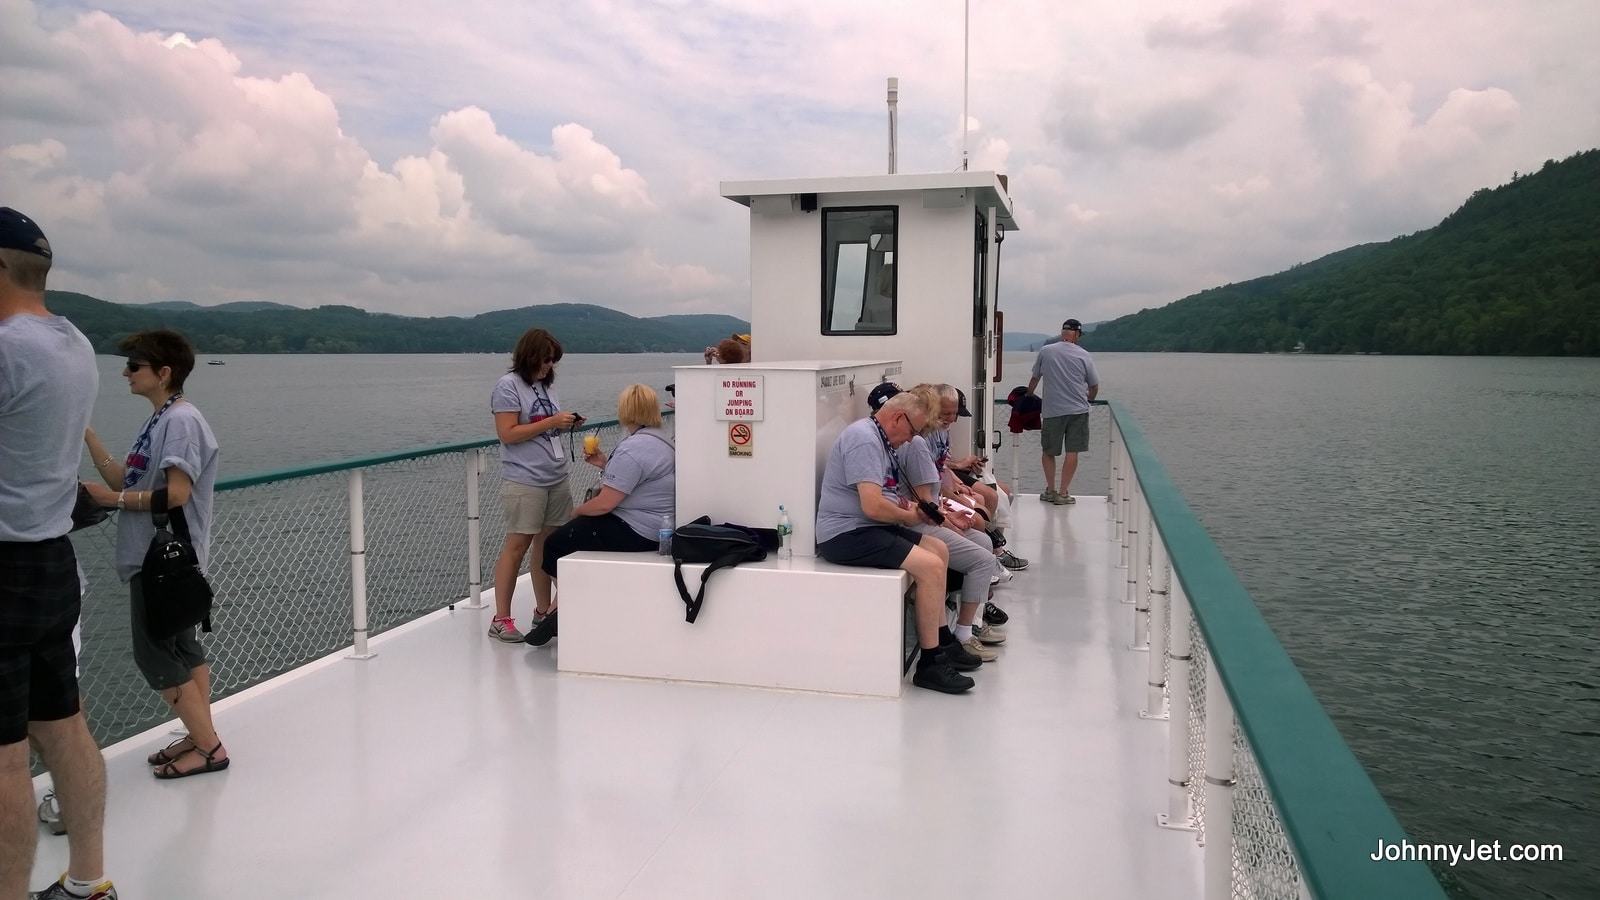 Private Glimmerglass Queen boat ride organized by Tauck Eventsin Cooperstown